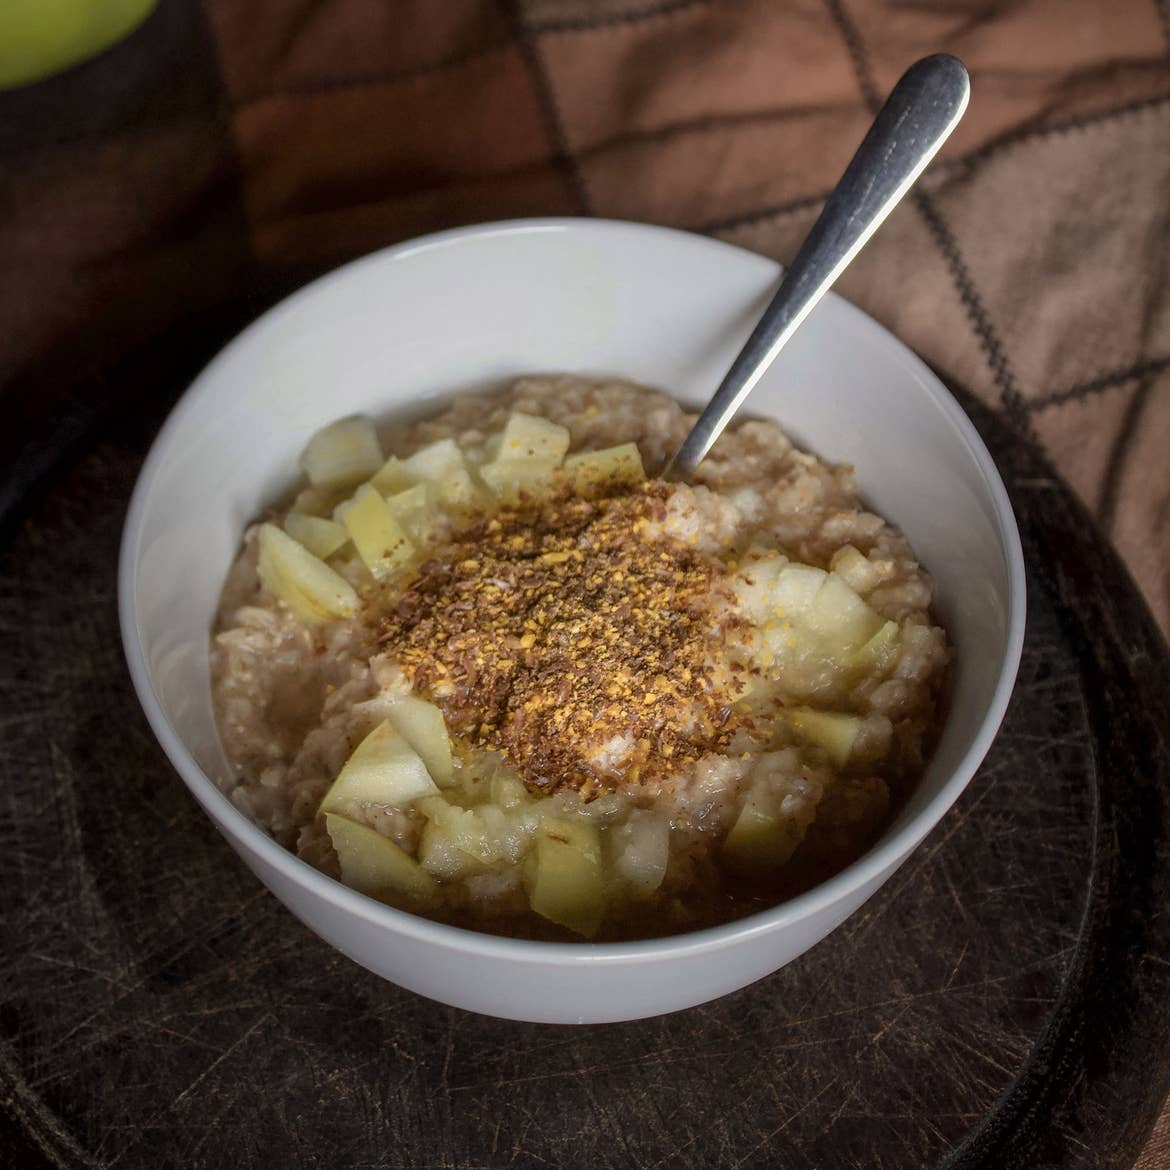 A shot of oatmeal sitting on a table topped with cinnamon, graham cracker crust and apple slices.